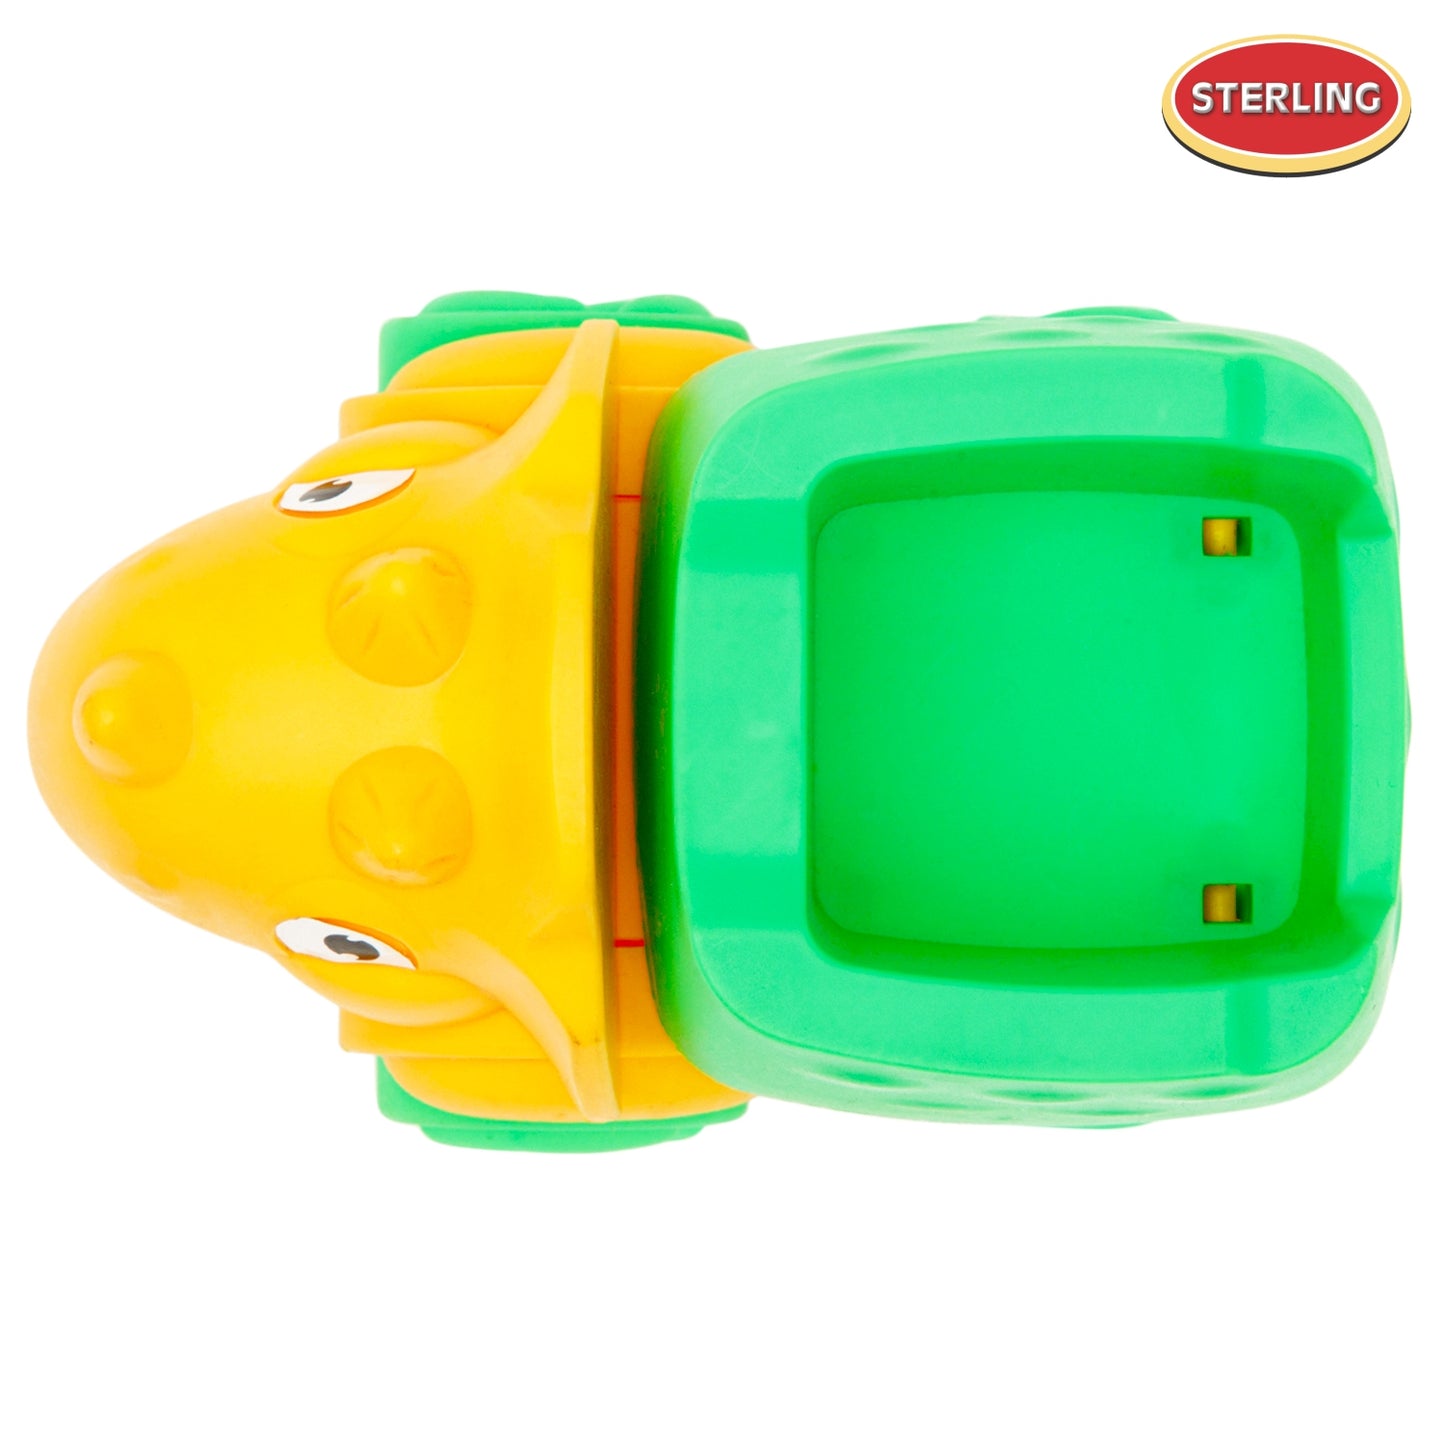 Sterling Mini Monster Cars - Push and Go Toy Cars, Friction-Powered Cars, Push-Go Cars for Toddlers and Kids.